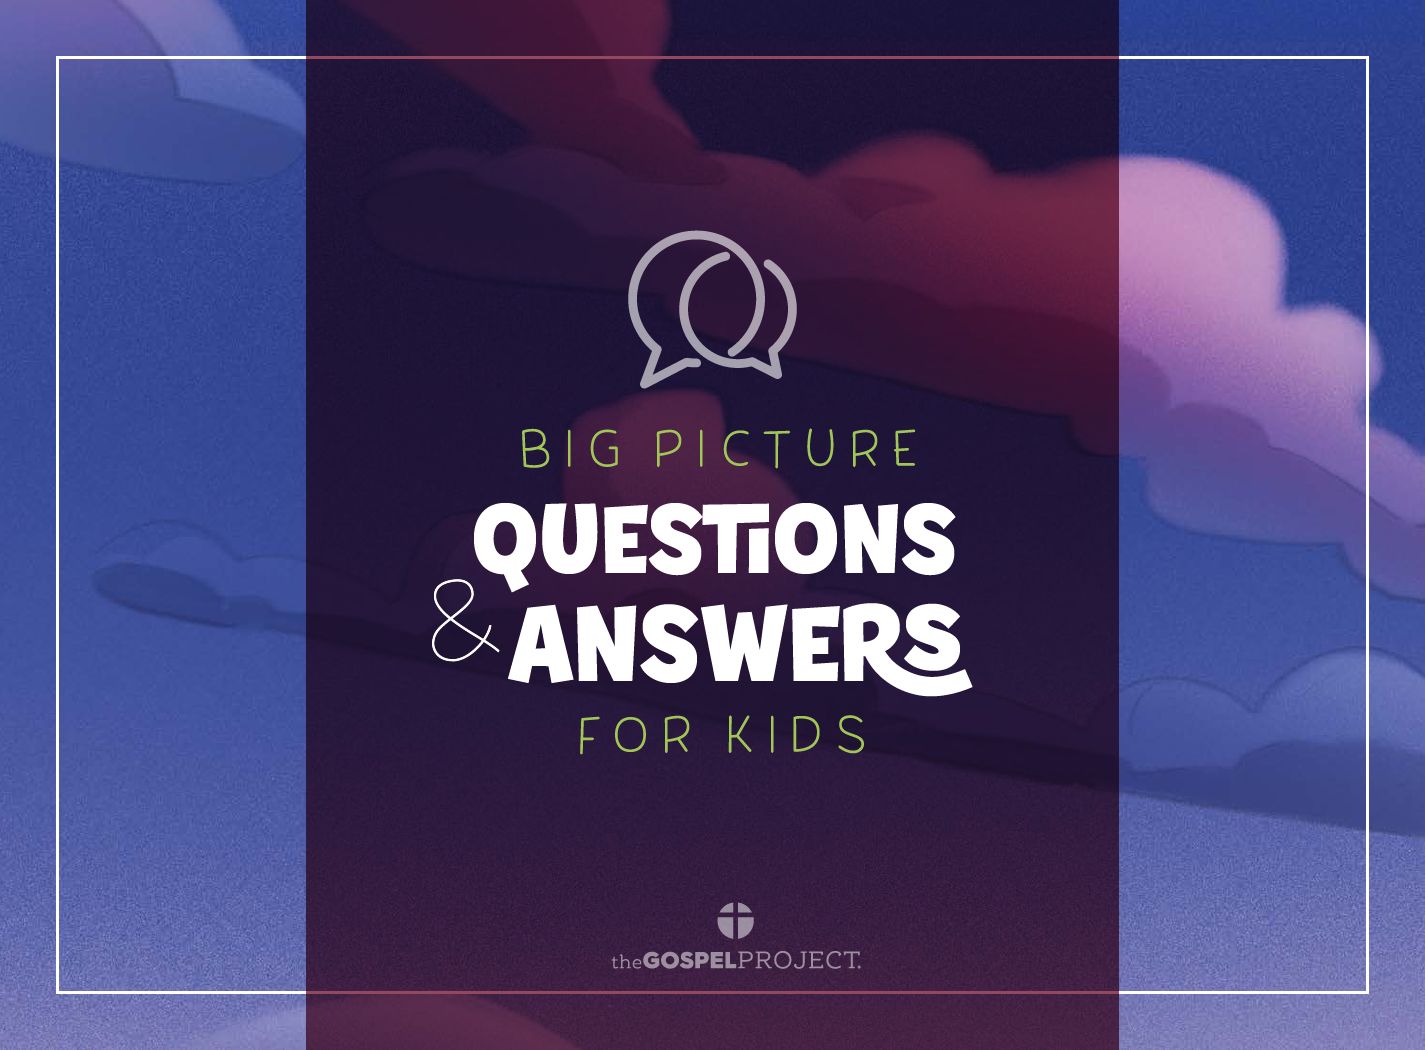 Big Picture Questions and Answers